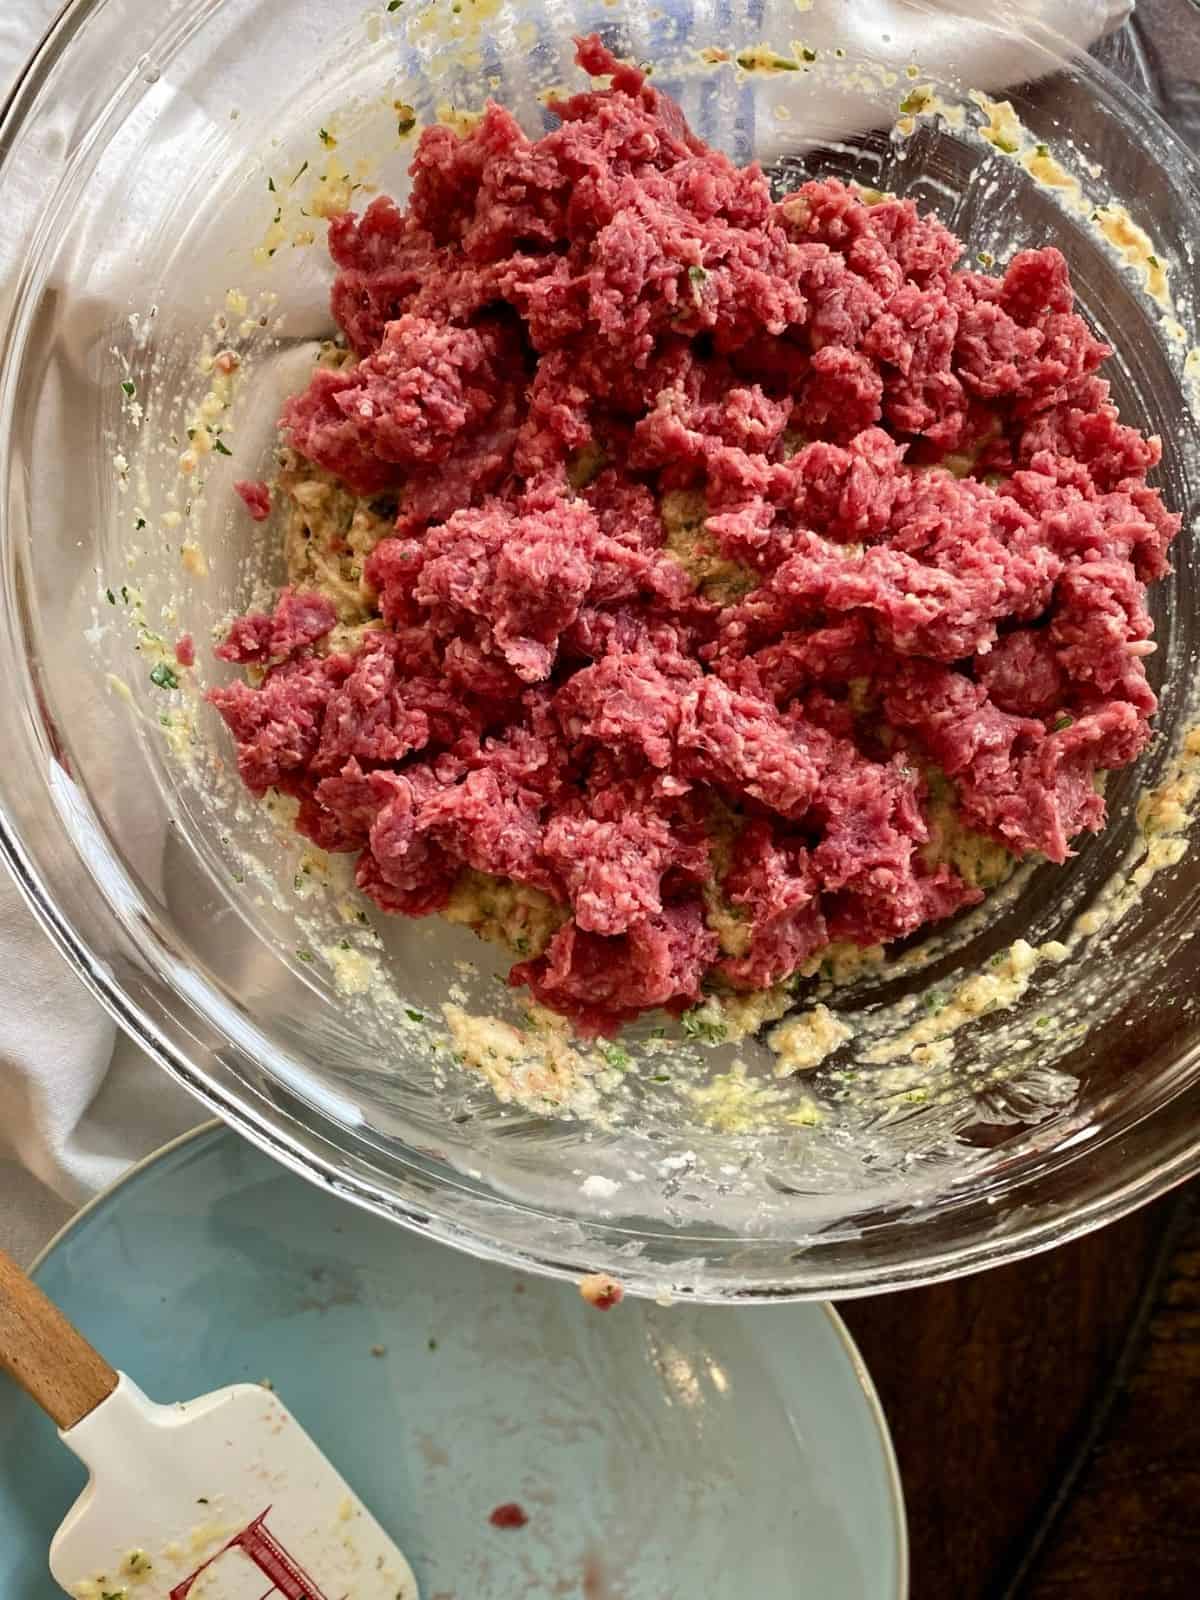 meatball mixture with remaining ground beef crumbled over top